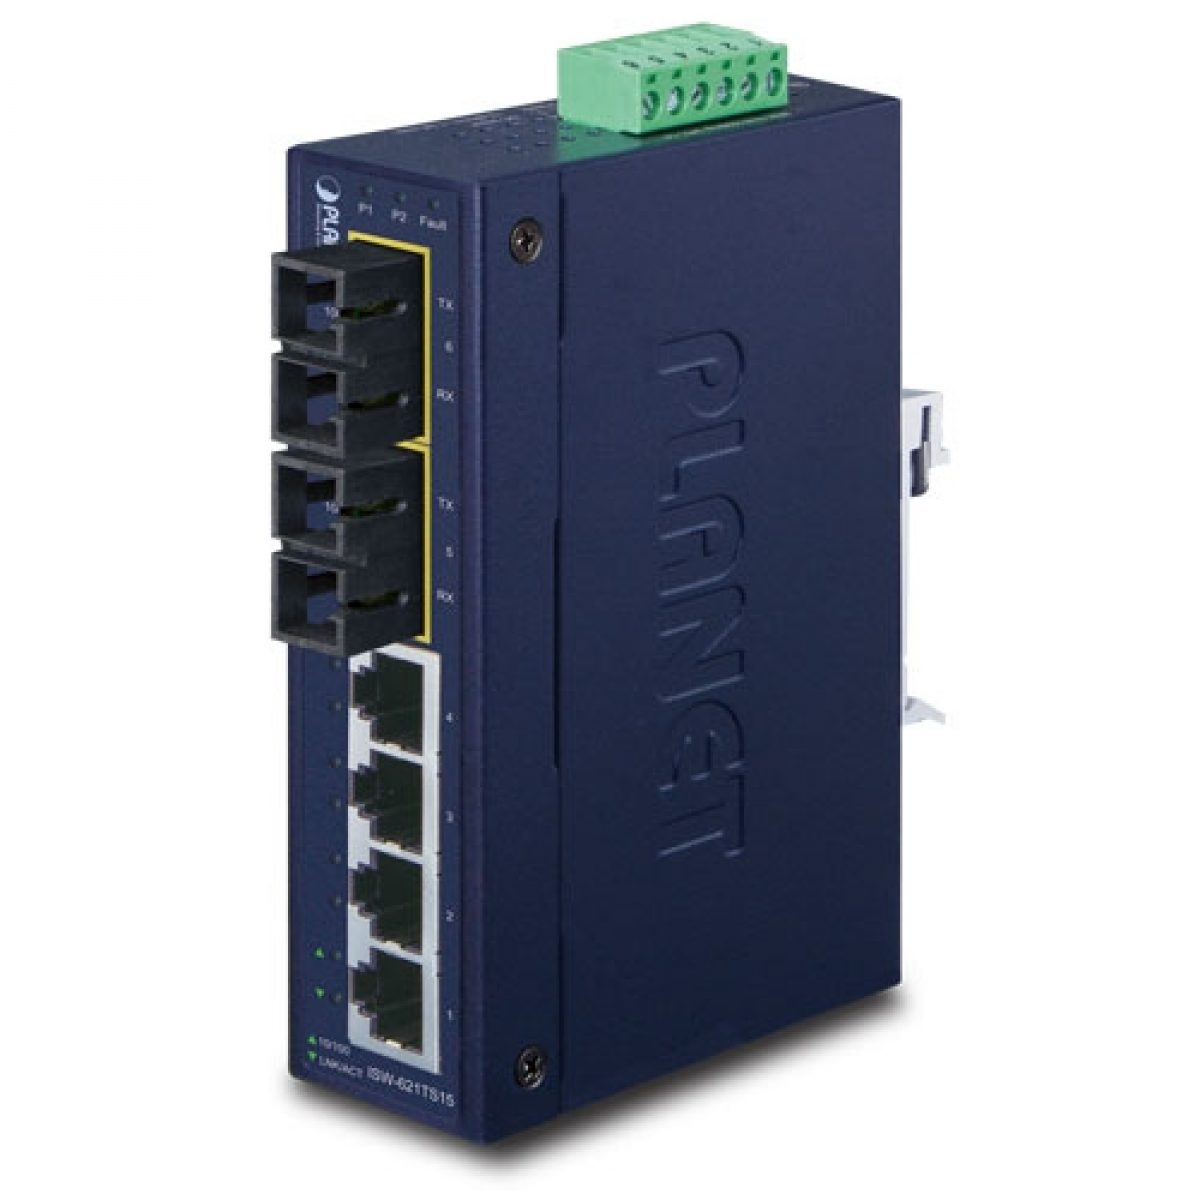 ISW-621TS15 IP30 Industrial Ethernet Switch 4-Port 10/100Base-TX +